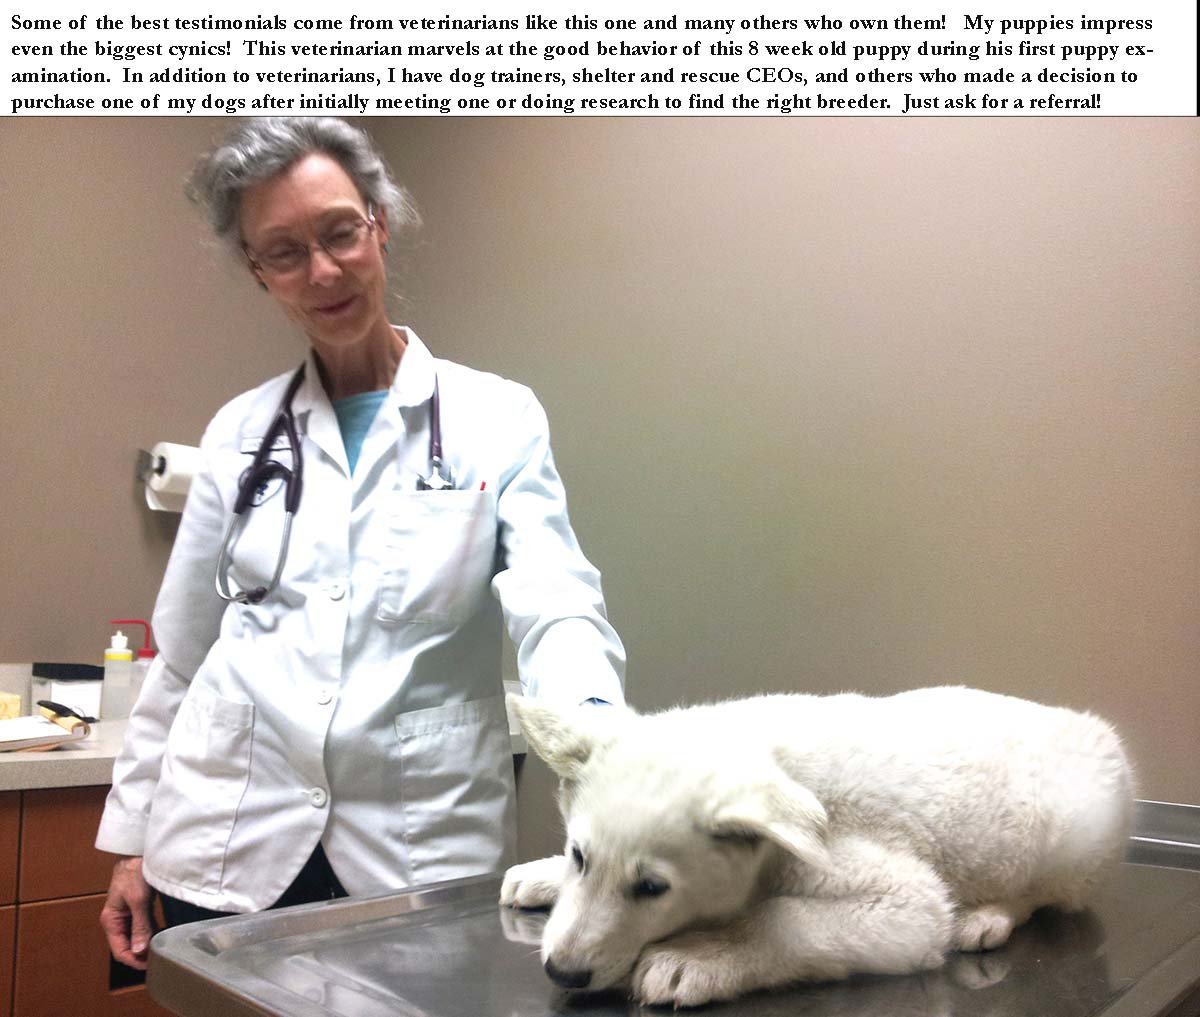  A veterinarian exams an 8 week old White German Shepherd puppy from Polarbear White Shepherds kennel.  This is one well mannered and intelligent puppy!   